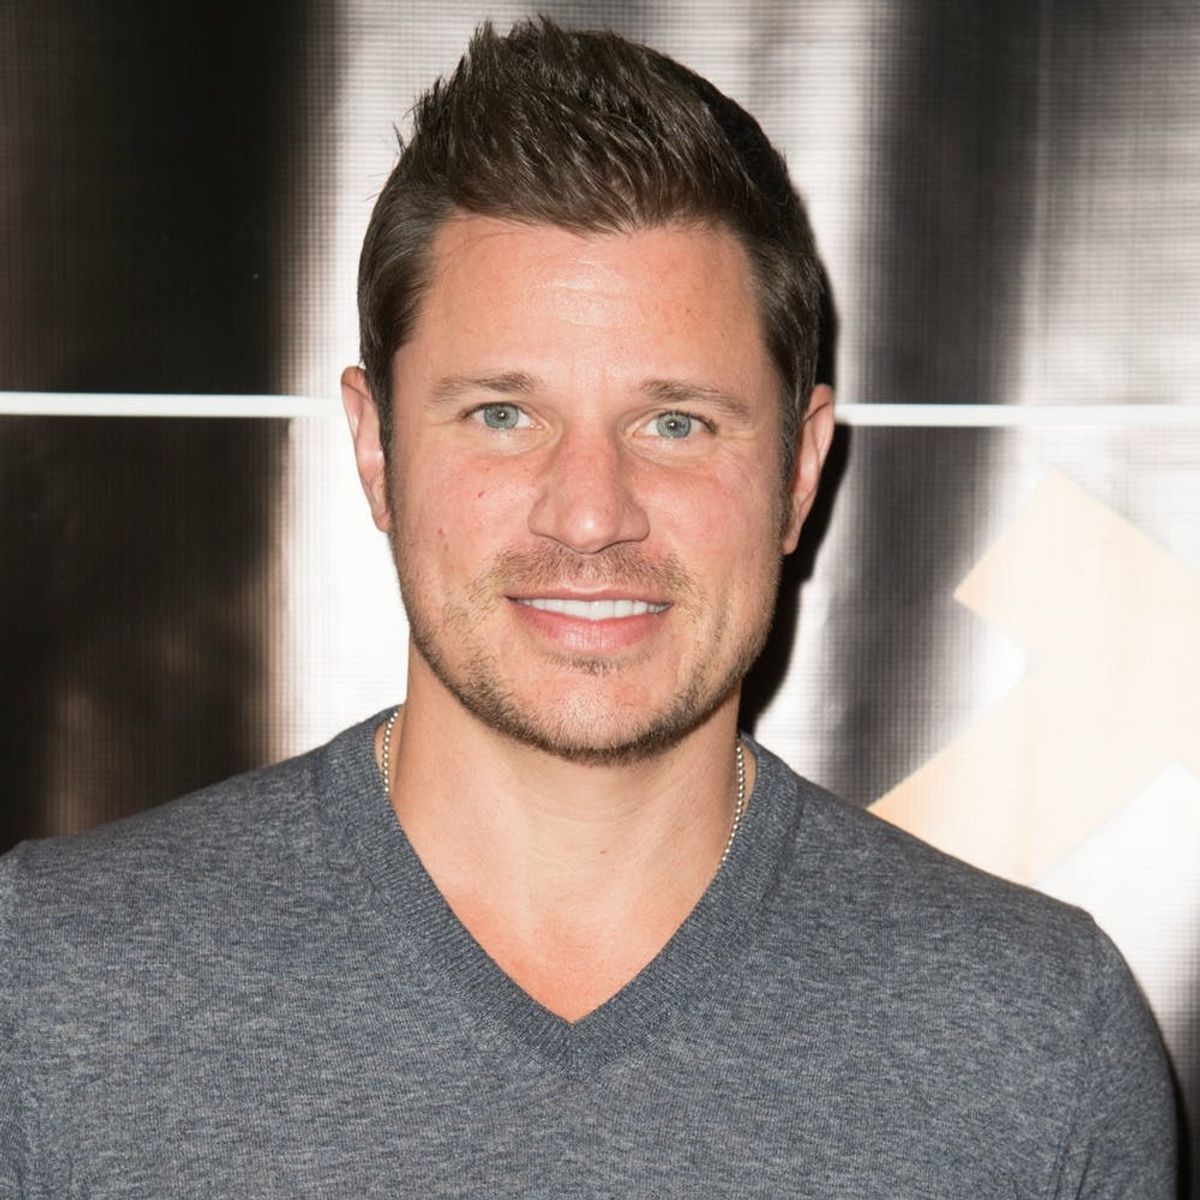 Nick Lachey and Donnie Wahlberg Are Teaming Up to Make a Show About Boy Bands